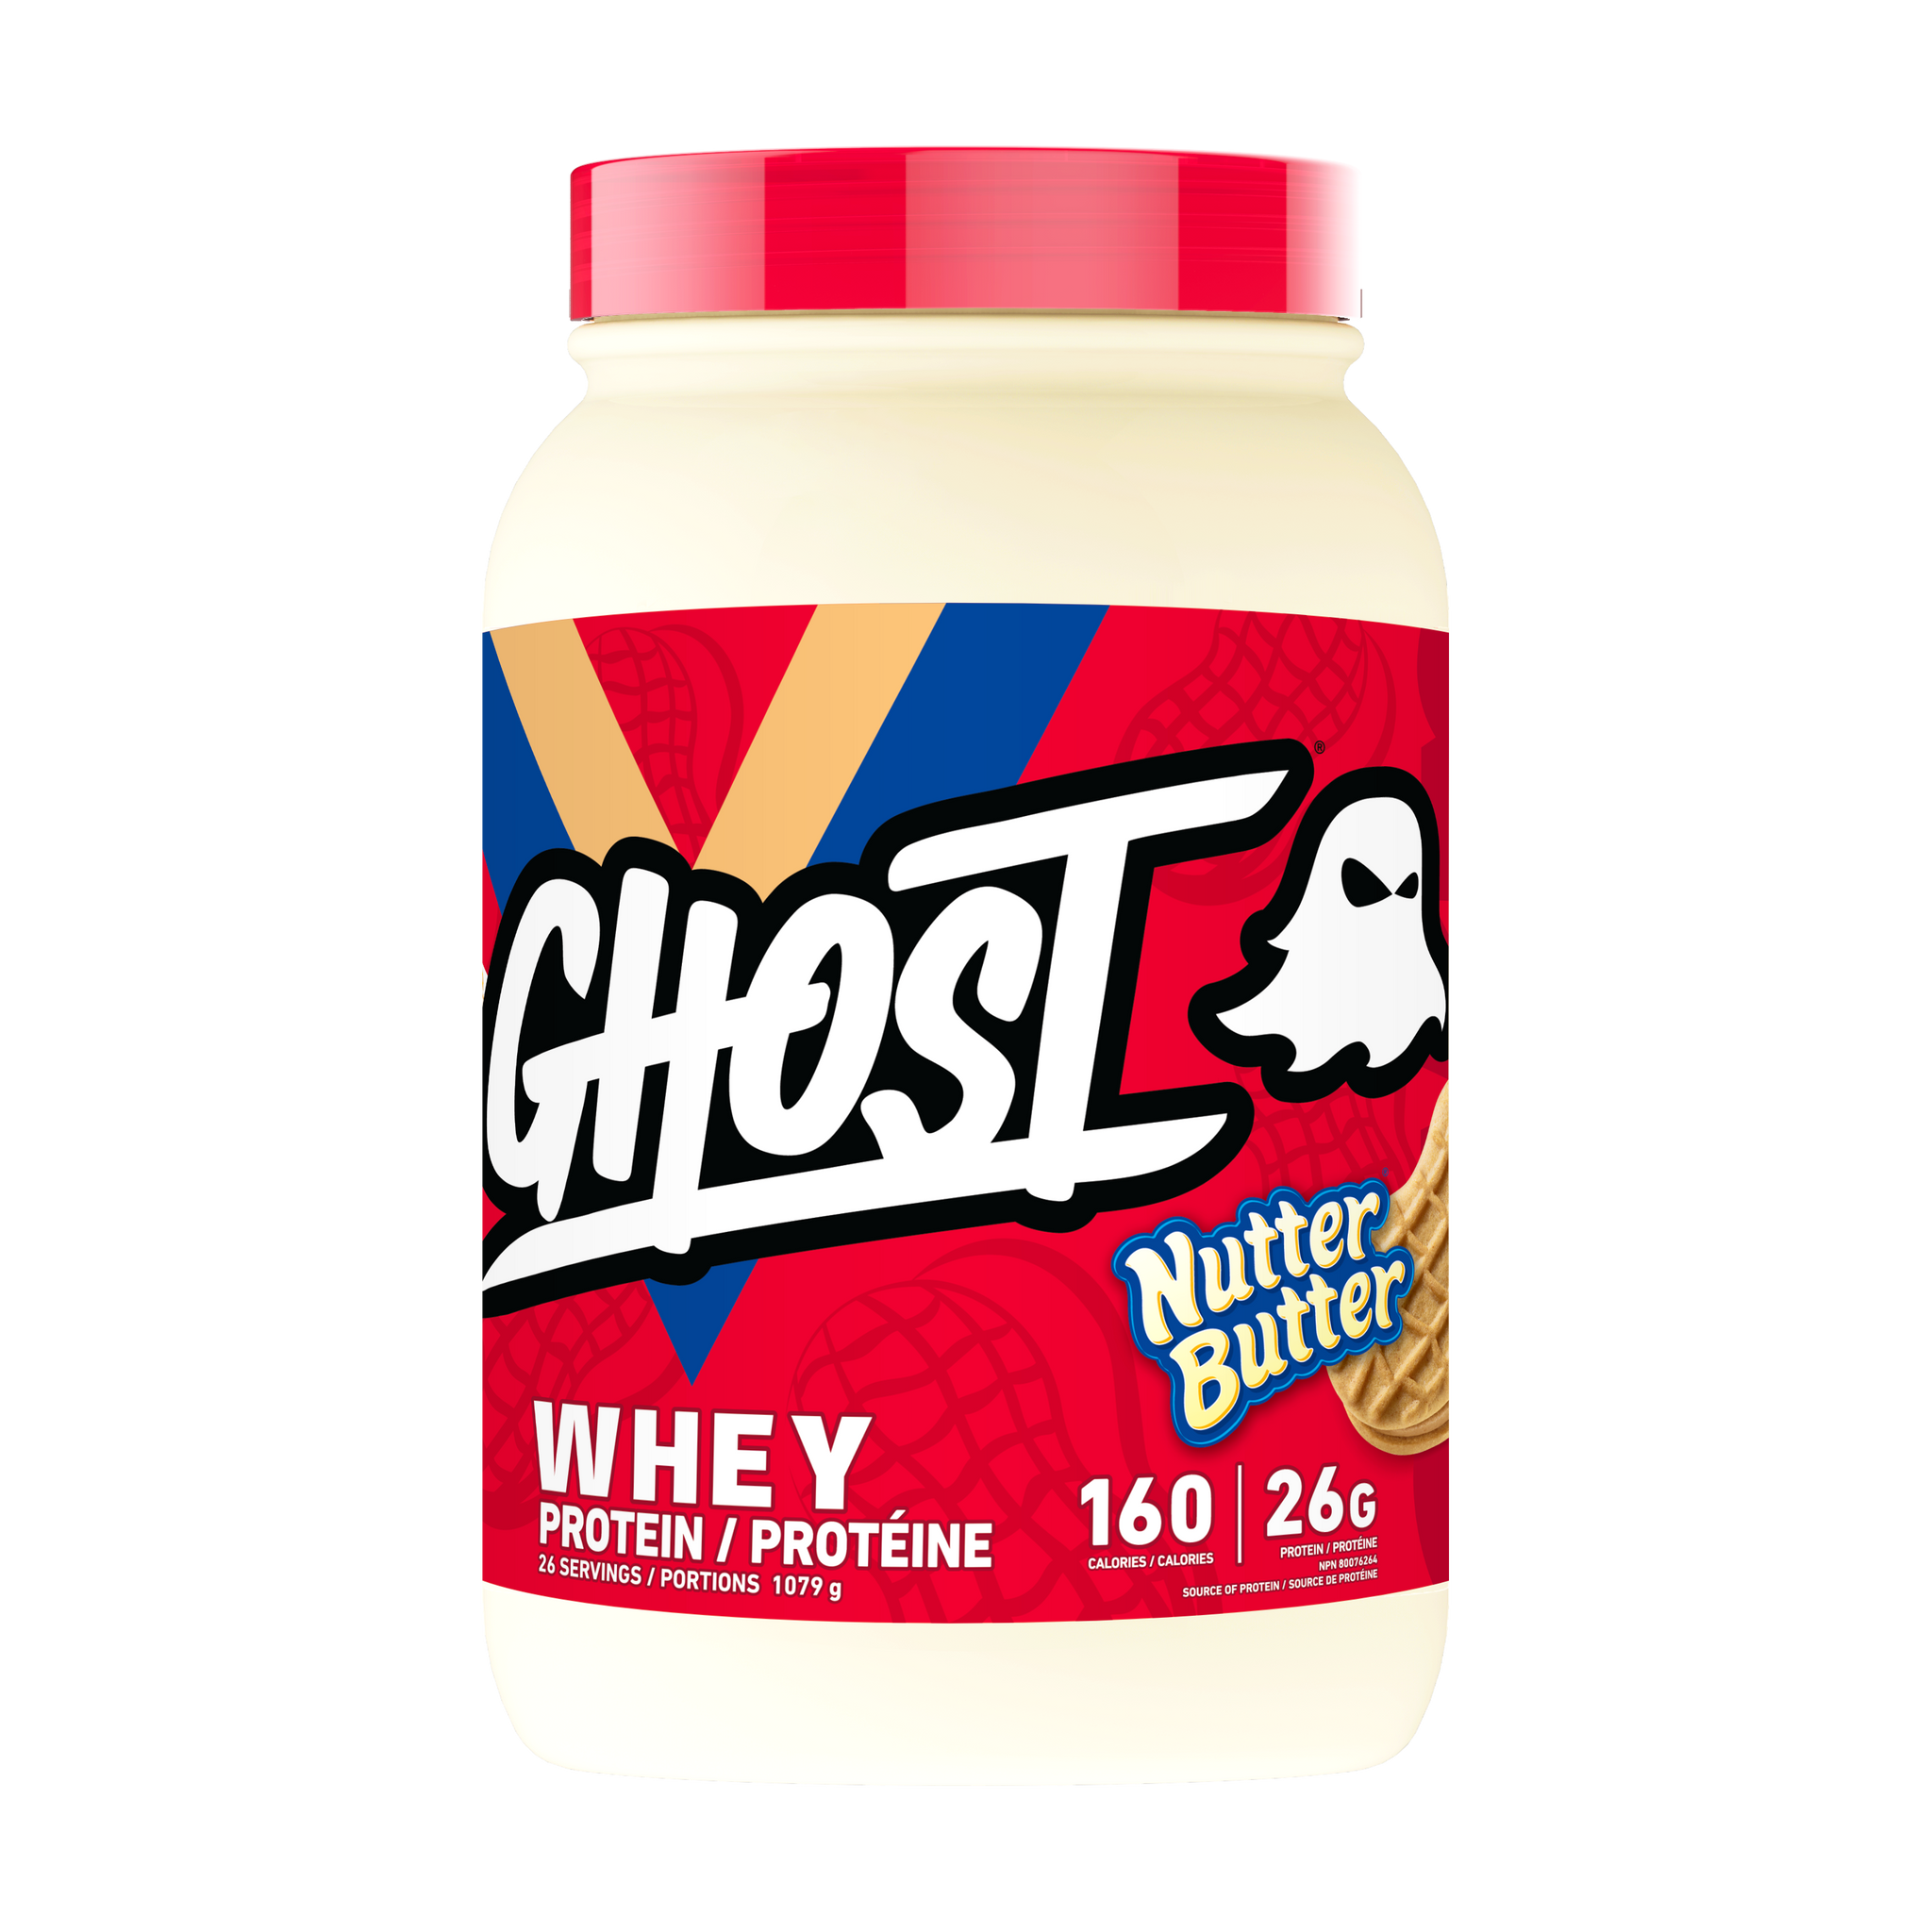 Ghost Whey Nutter Butter / 26 Servings